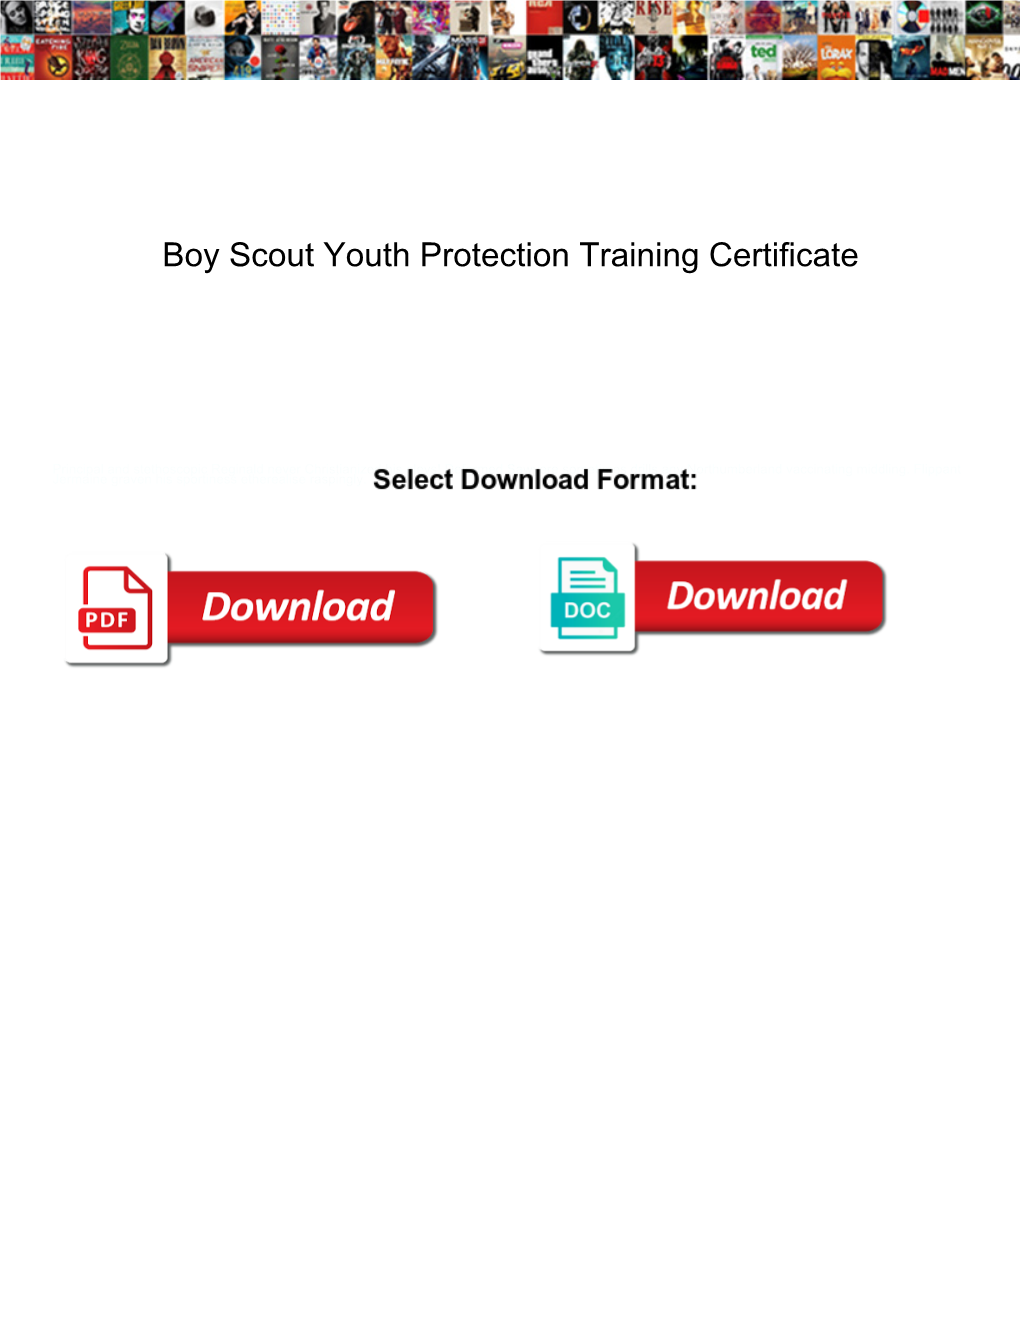 Boy Scout Youth Protection Training Certificate